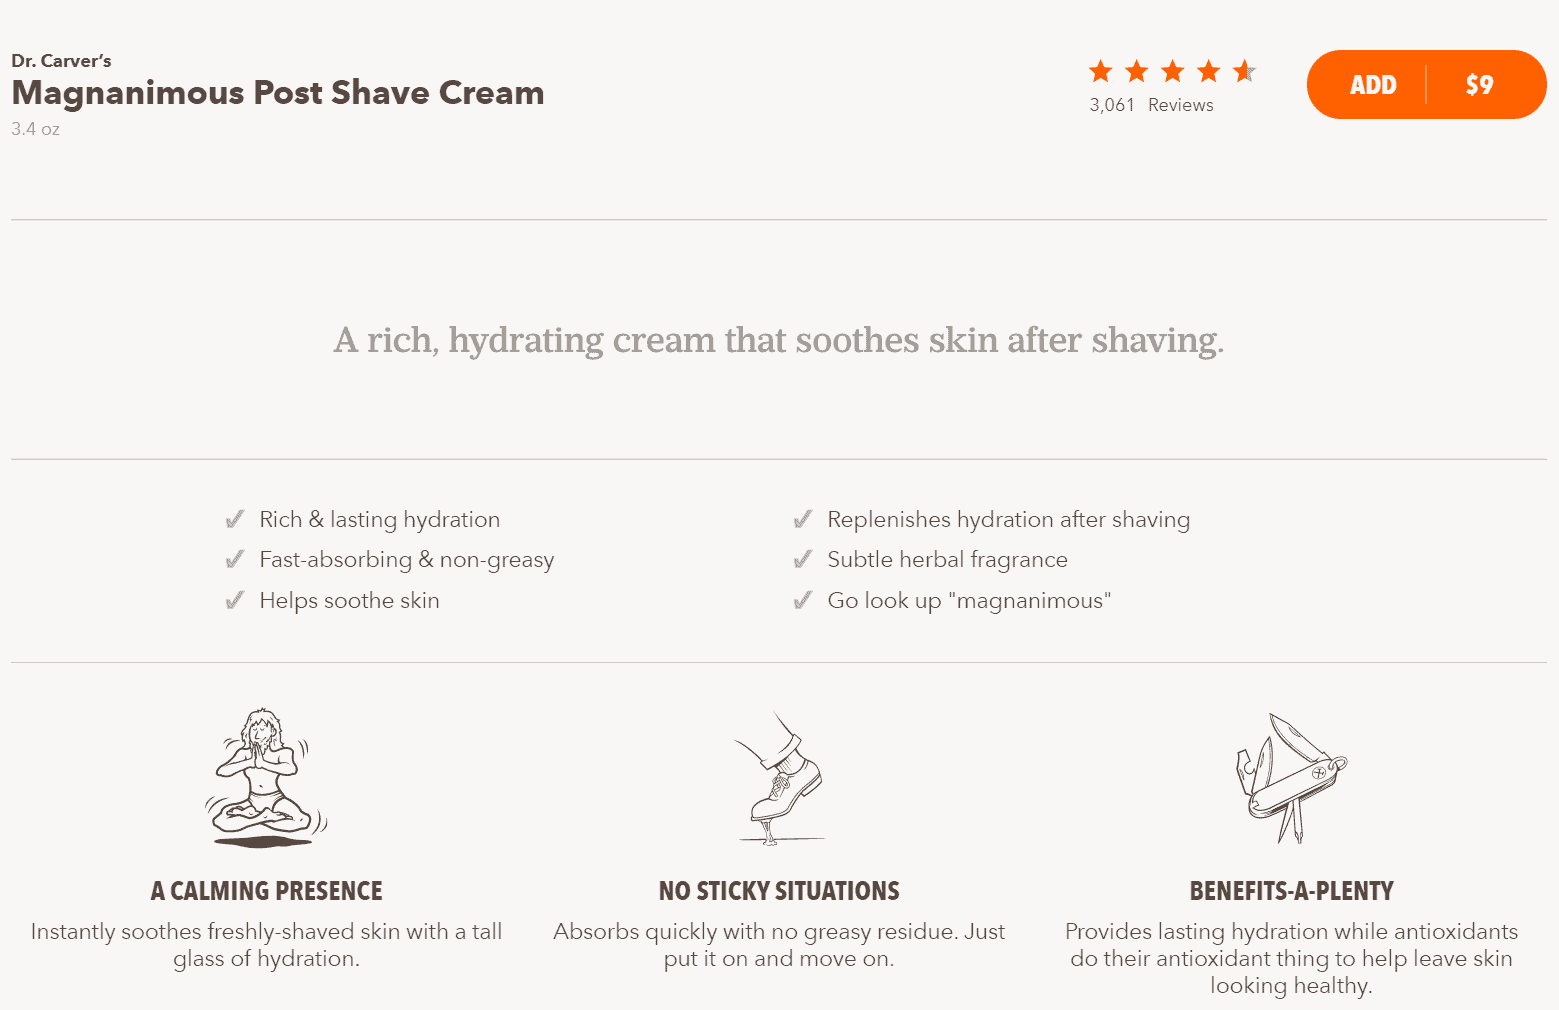 product page by Dollar Shave Club